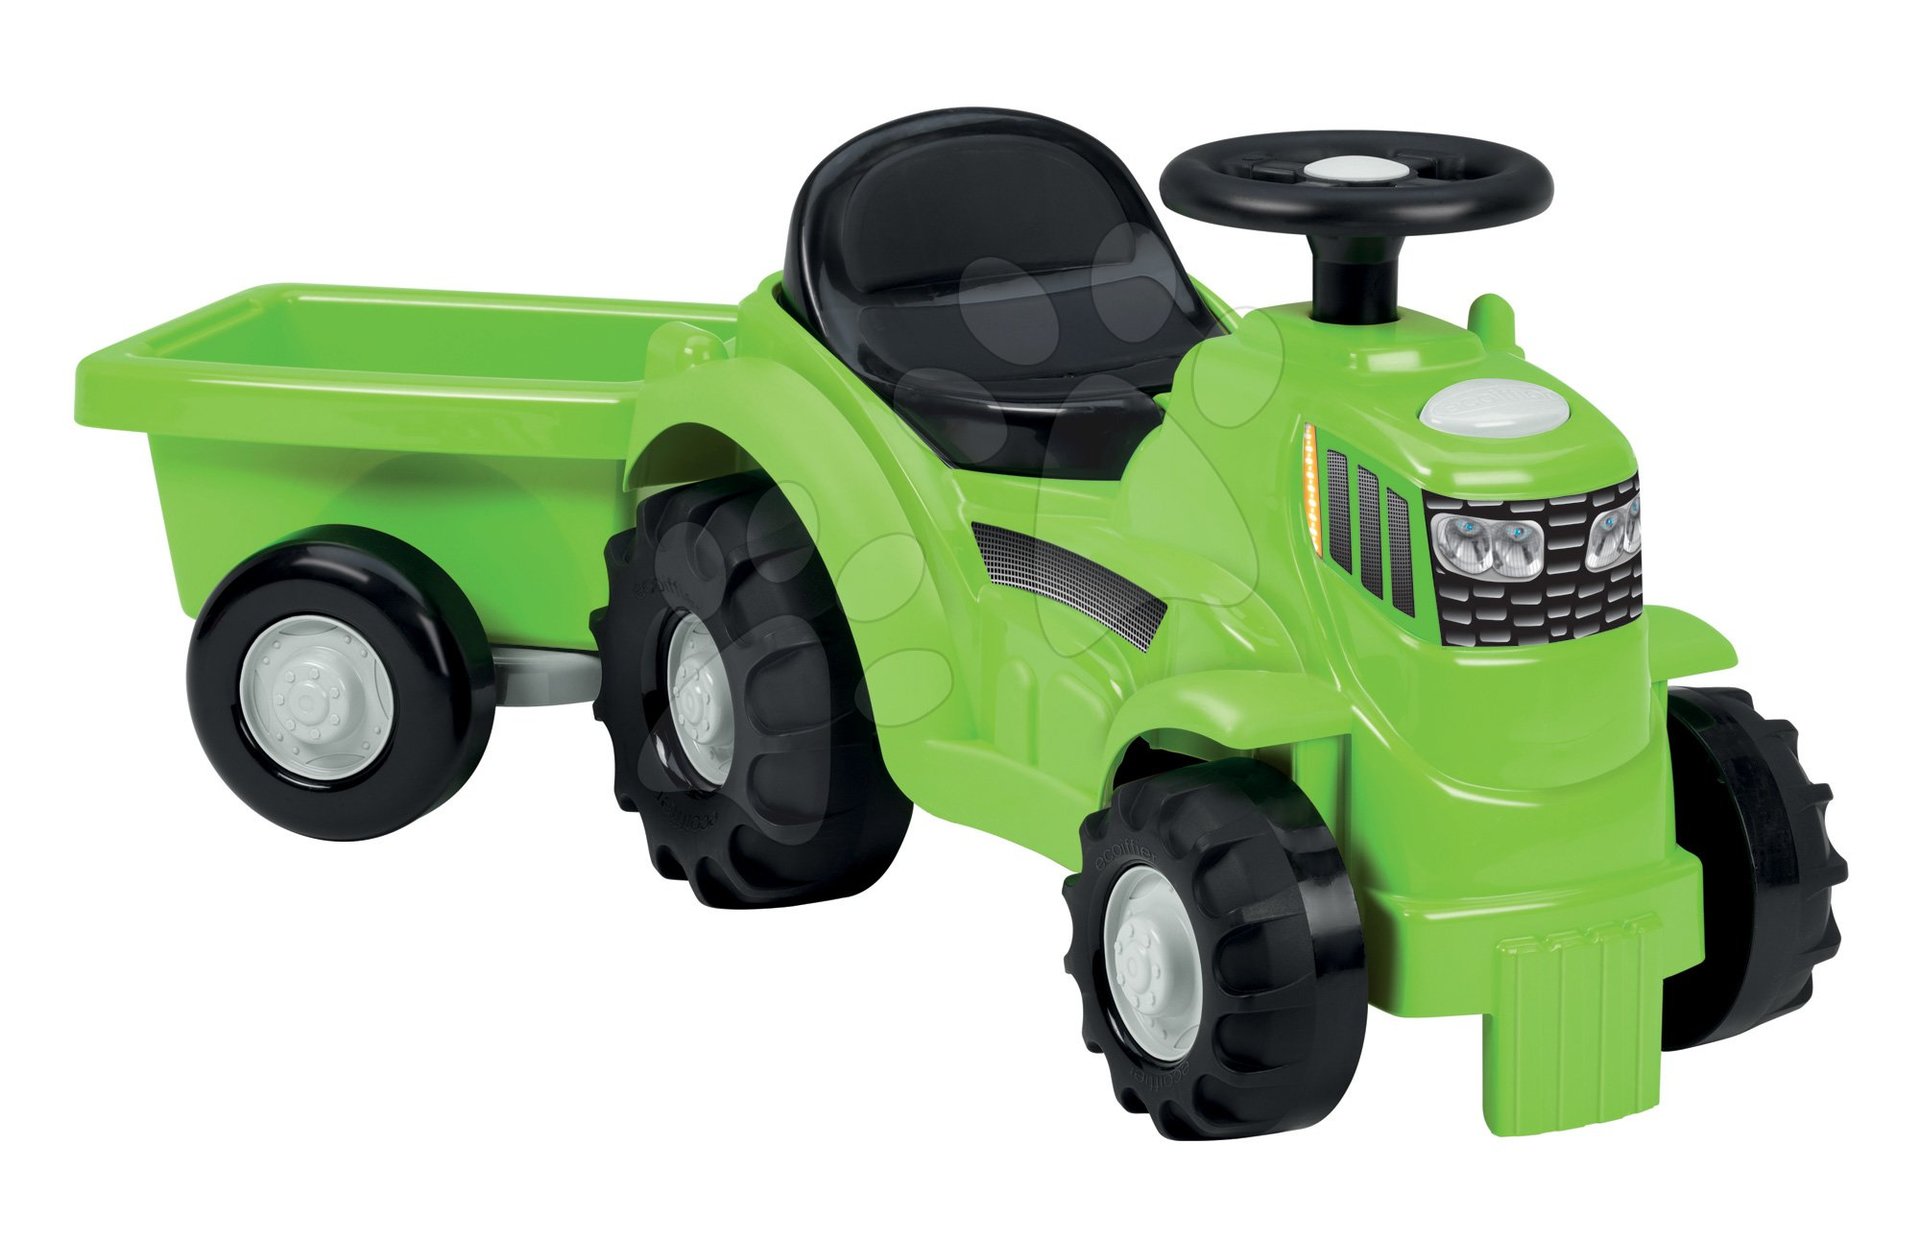 Ride-ons from 12 months - Écoiffier Tractor With Trailer Ride on Toy 12 months and over, green